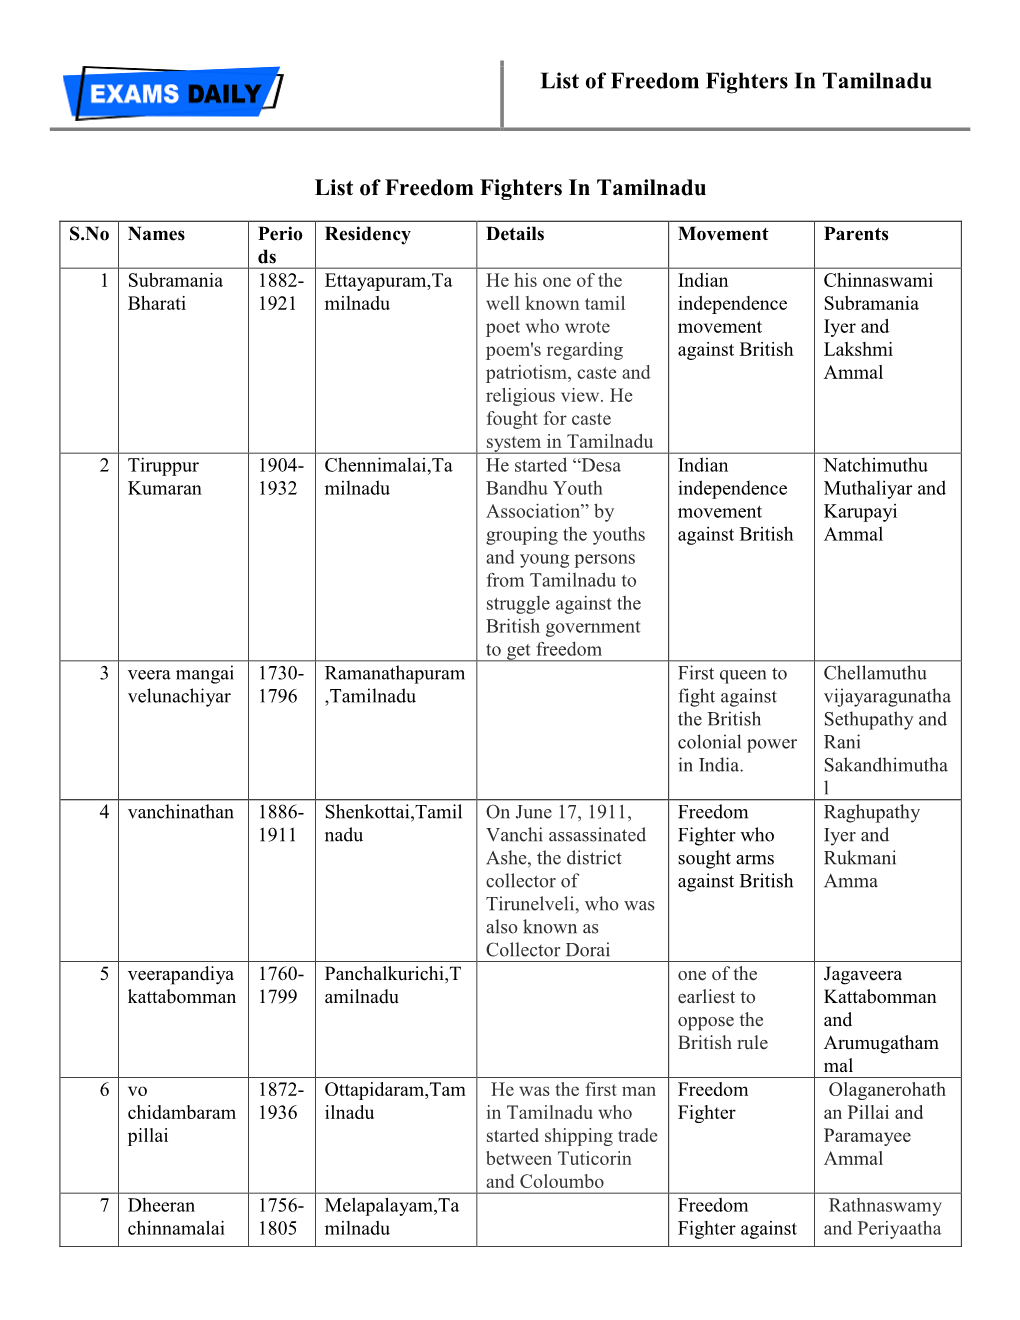 List of Freedom Fighters in Tamilnadu List of Freedom Fighters in Tamilnadu